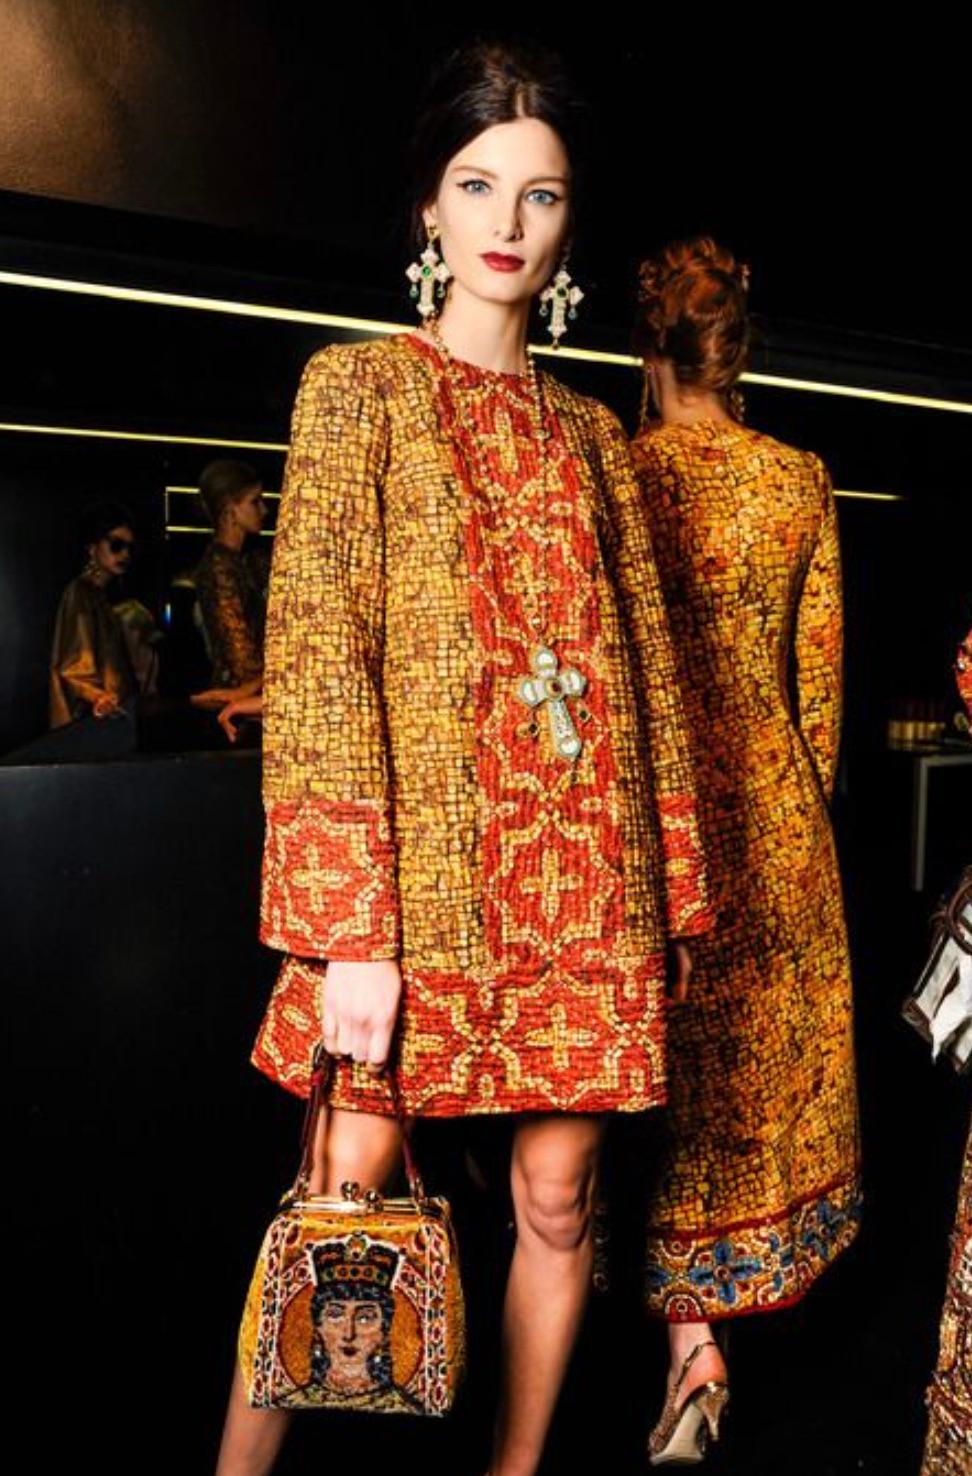 The Dolce & Gabbana Fall/Winter 2013 Byzantine mosaic dress is a stunning piece from the iconic collection inspired by the mesmerizing mosaics of the Monreale Cathedral in Sicily. This lovely mini dress is crafted from a luxurious silk and wool